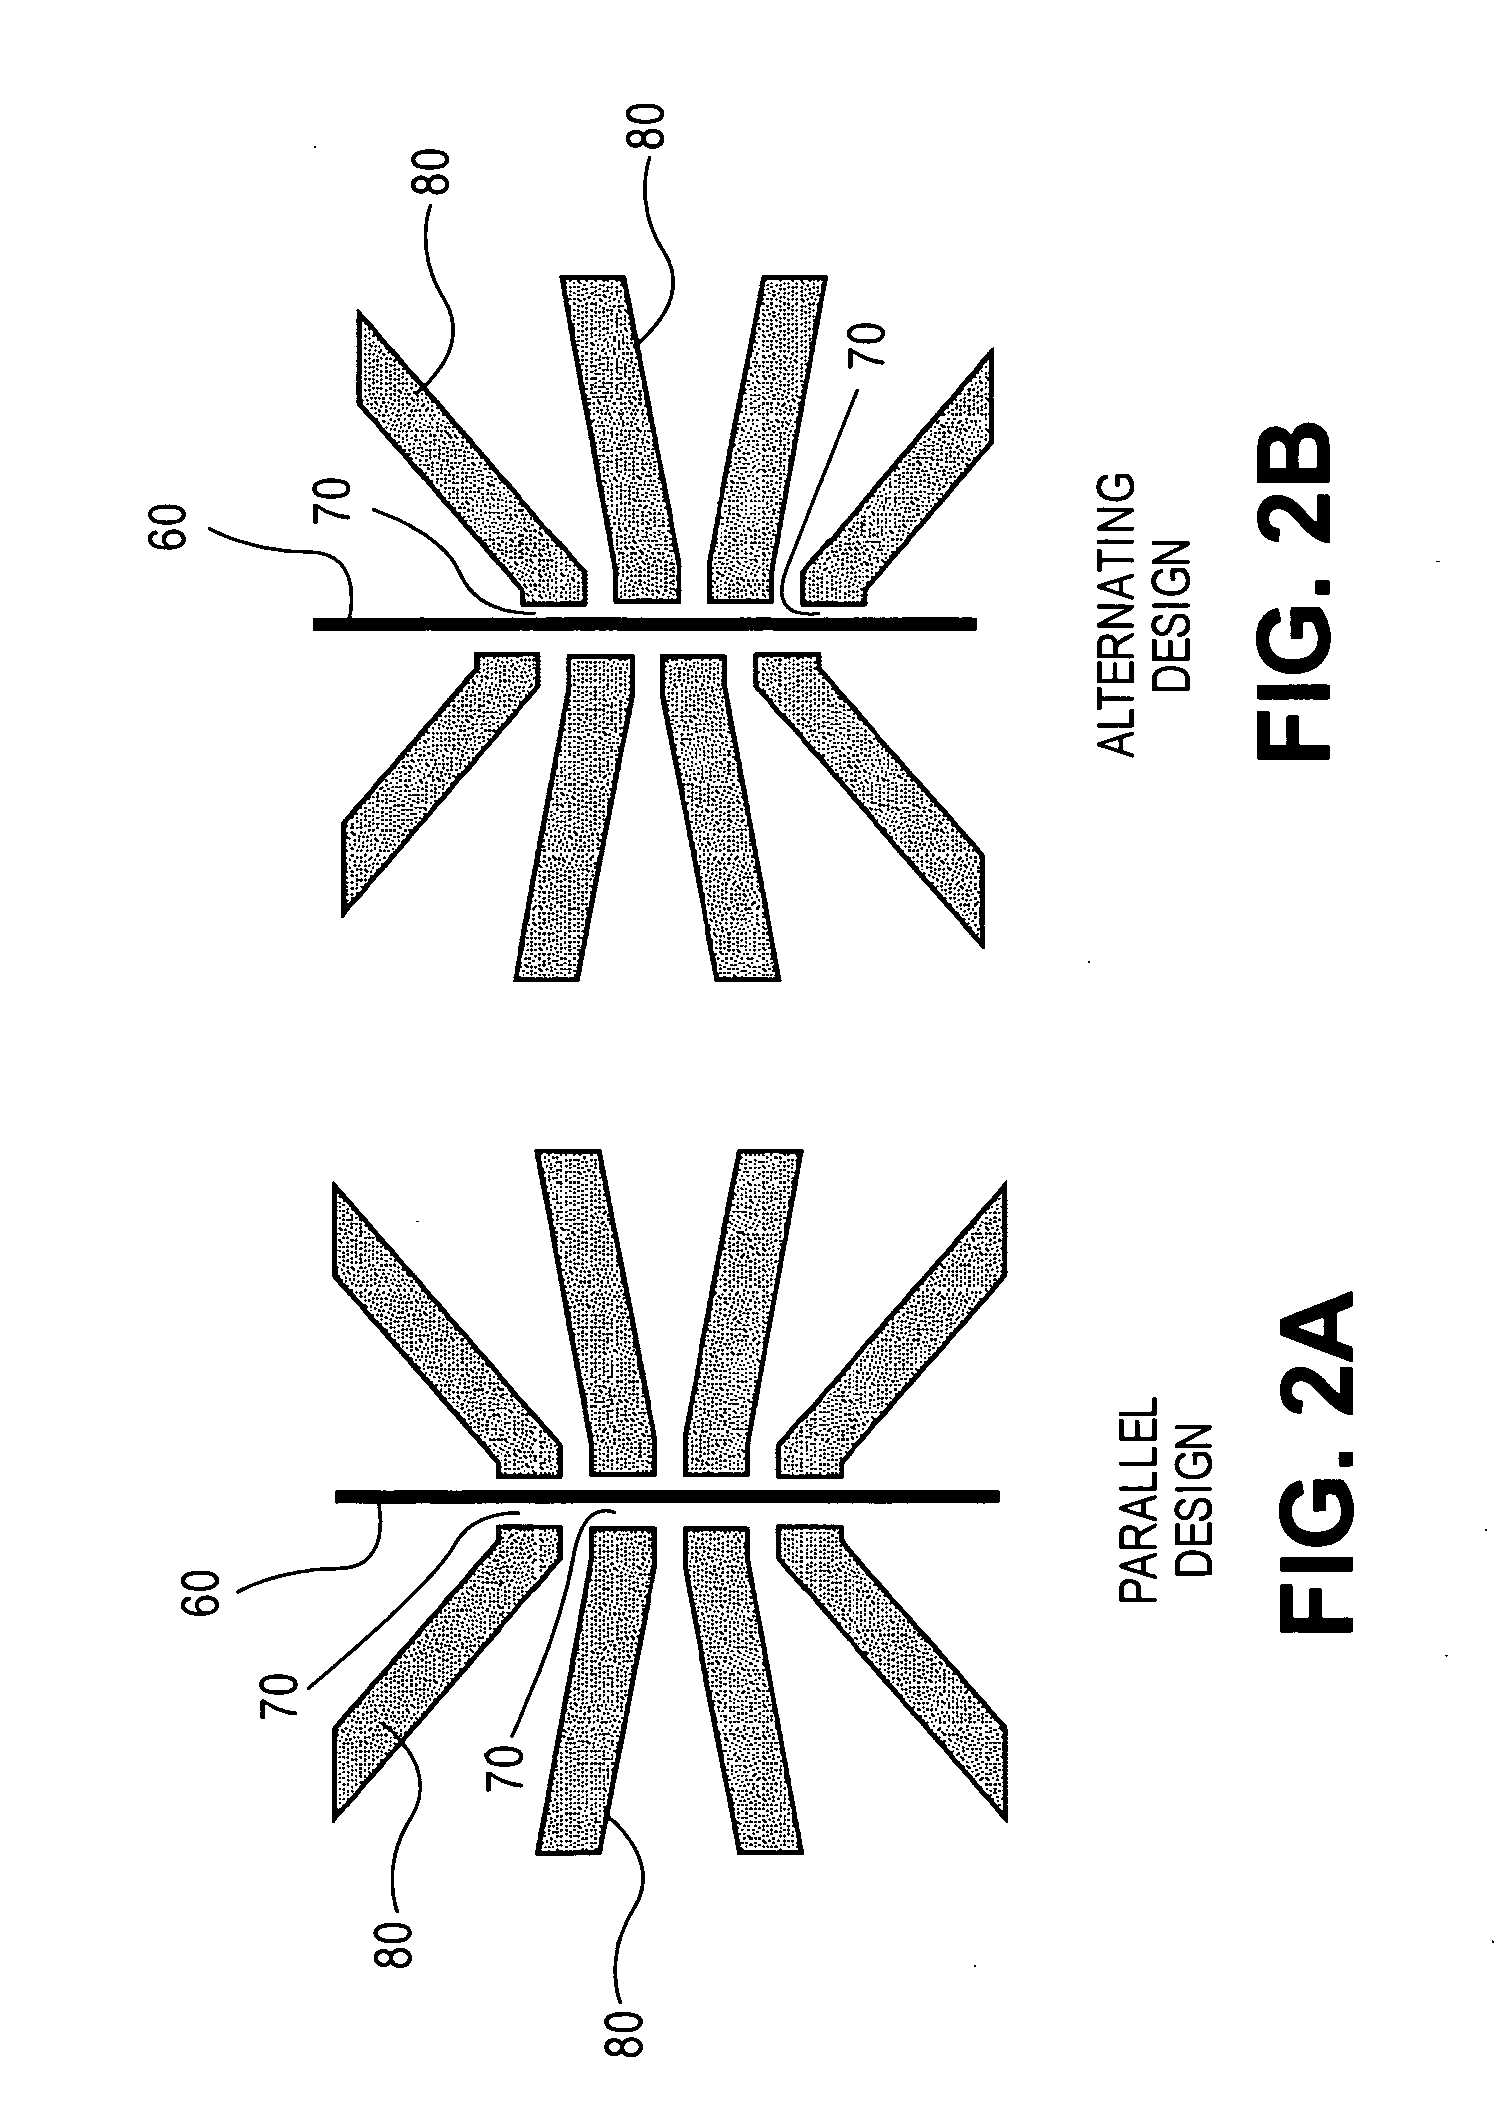 Deformable polymer membranes